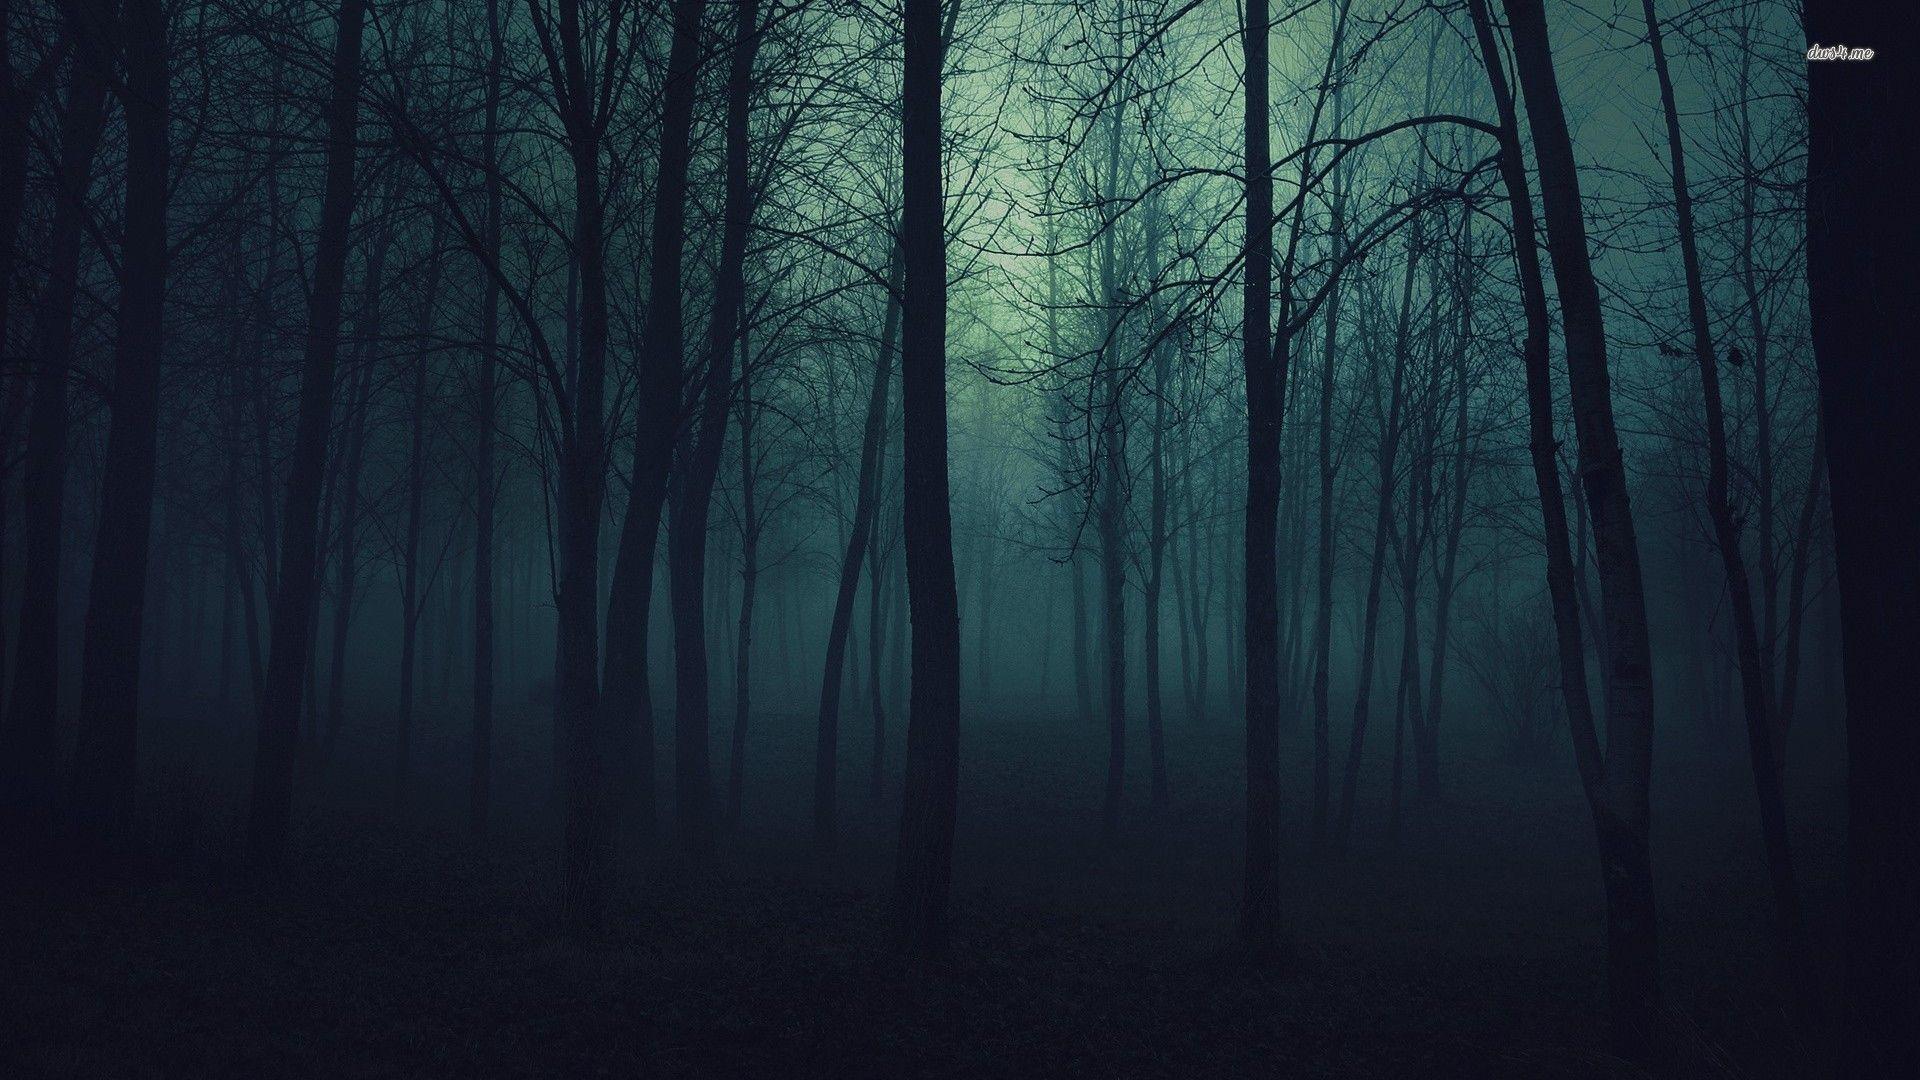  Dark  Forest  Wallpapers  HD  Wallpaper  Cave